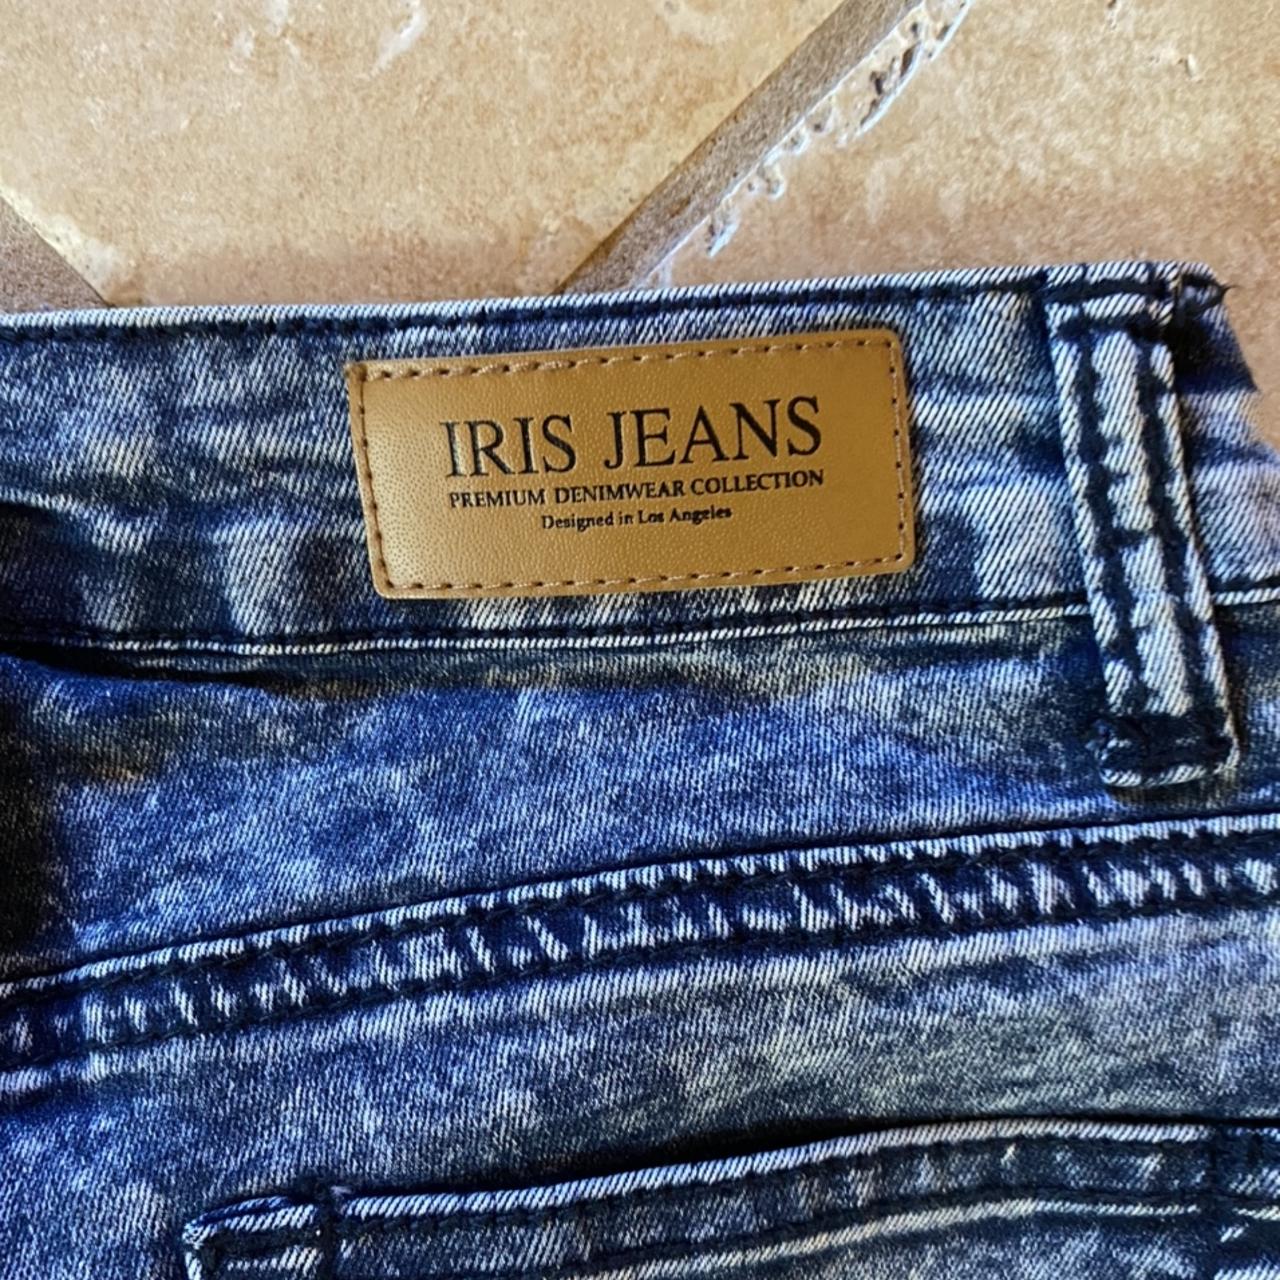 Iris Los Angeles Women's Blue and White Jeans (4)